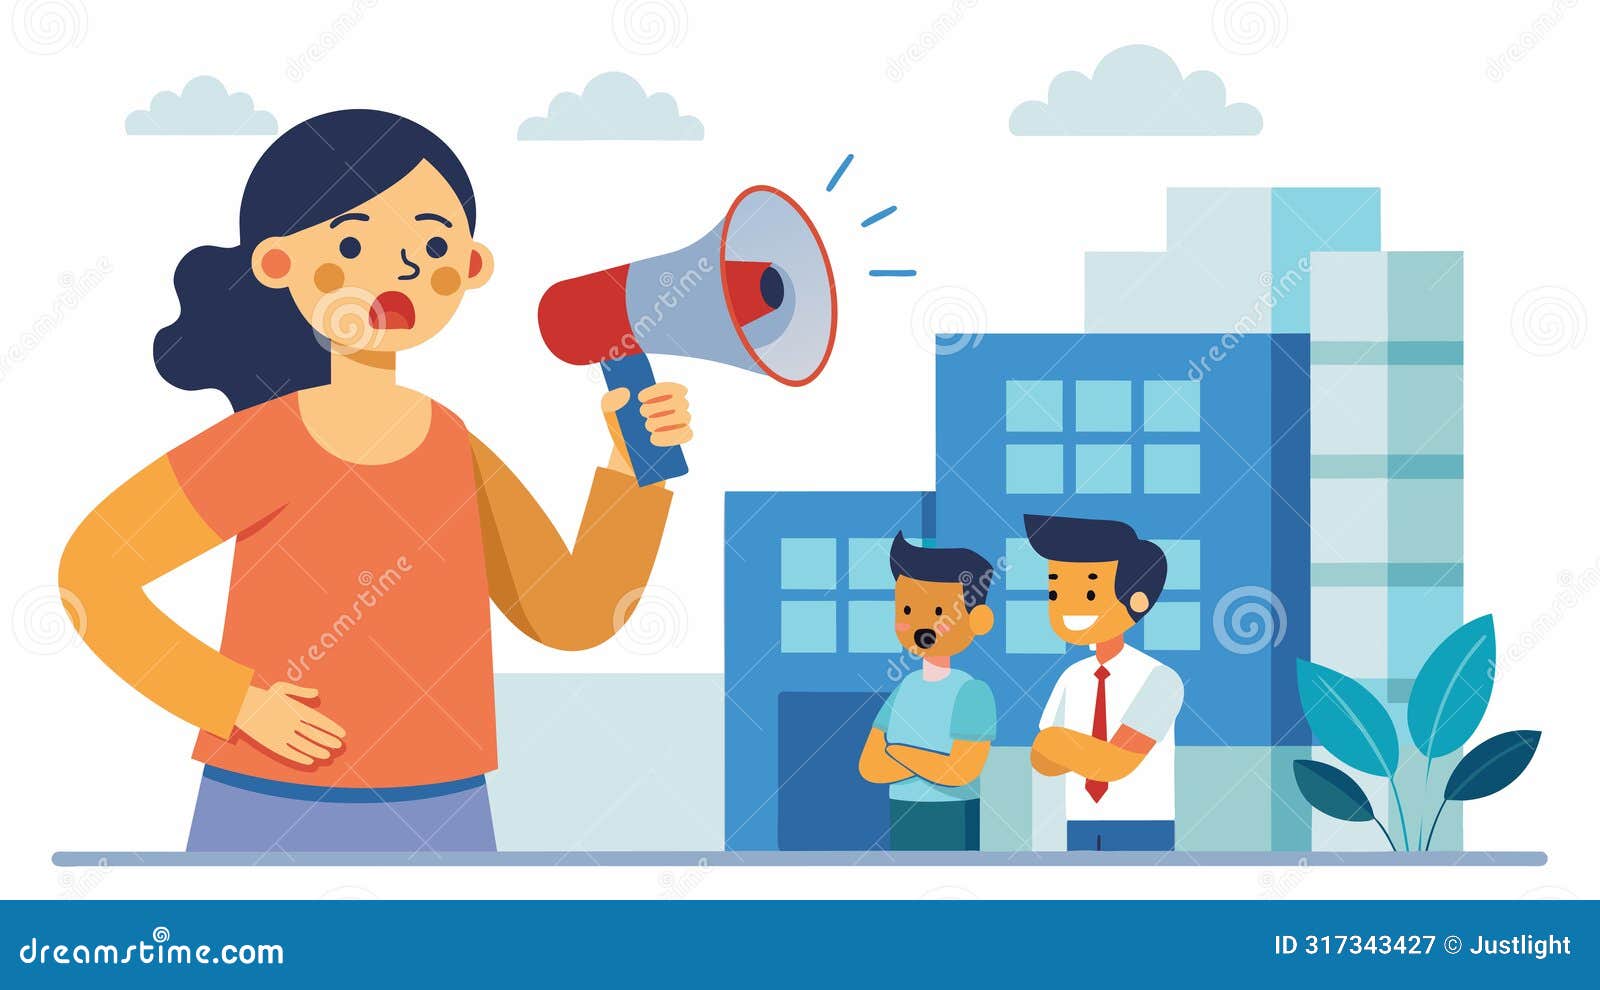 a concerned parent standing outside of a hospital using a megaphone to spread exaggerated claims about a supposed